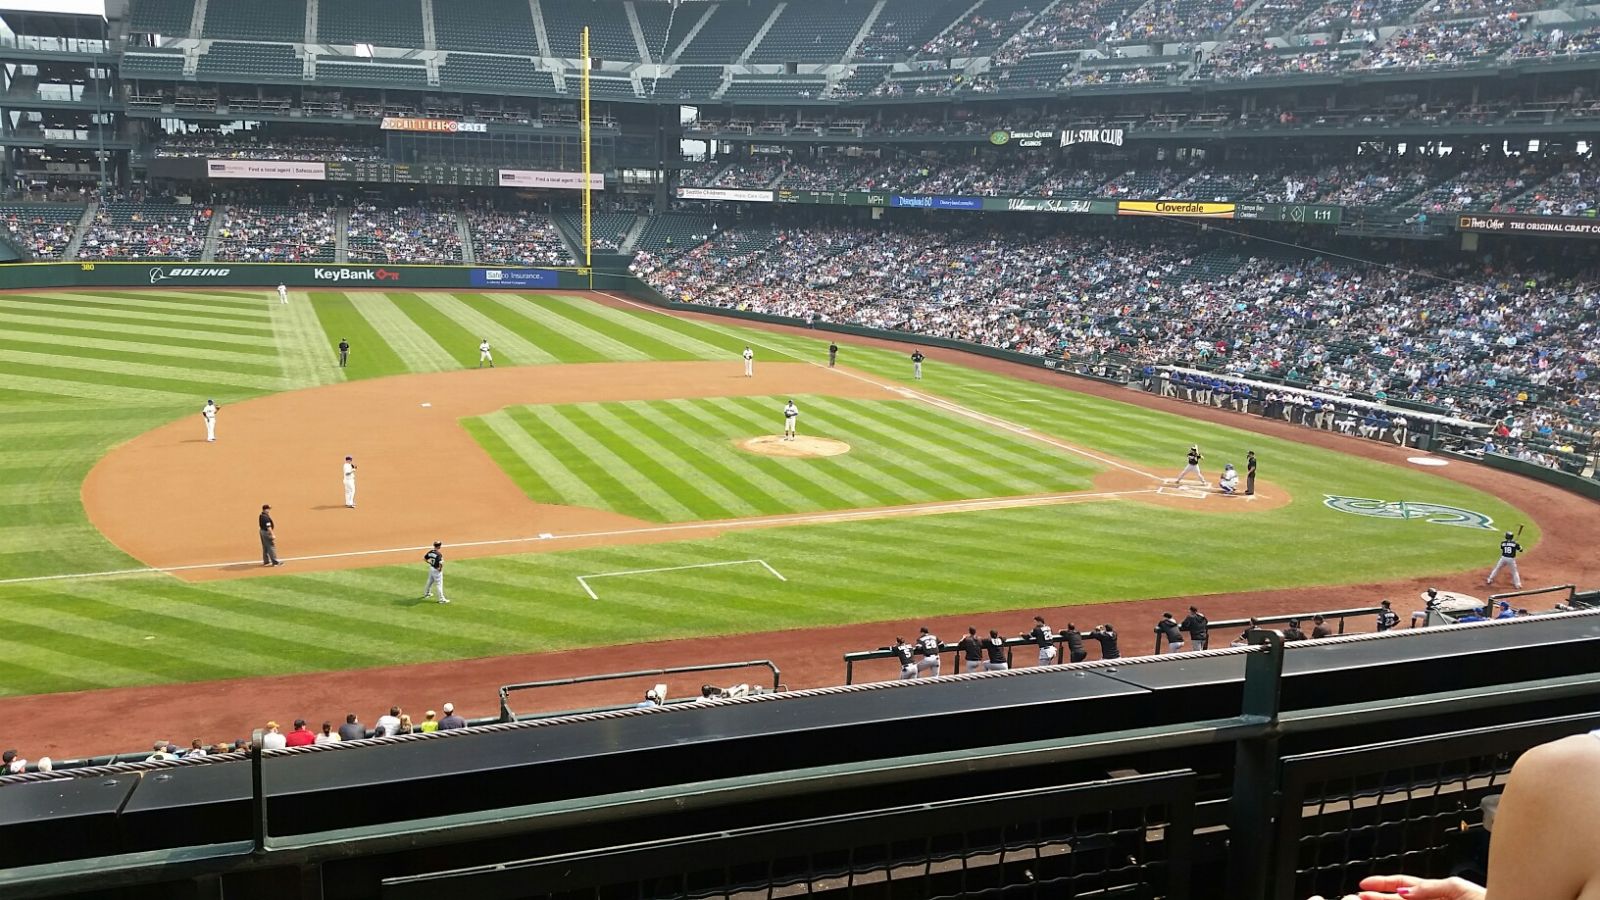 section 239, row 2 seat view  for baseball - t-mobile park